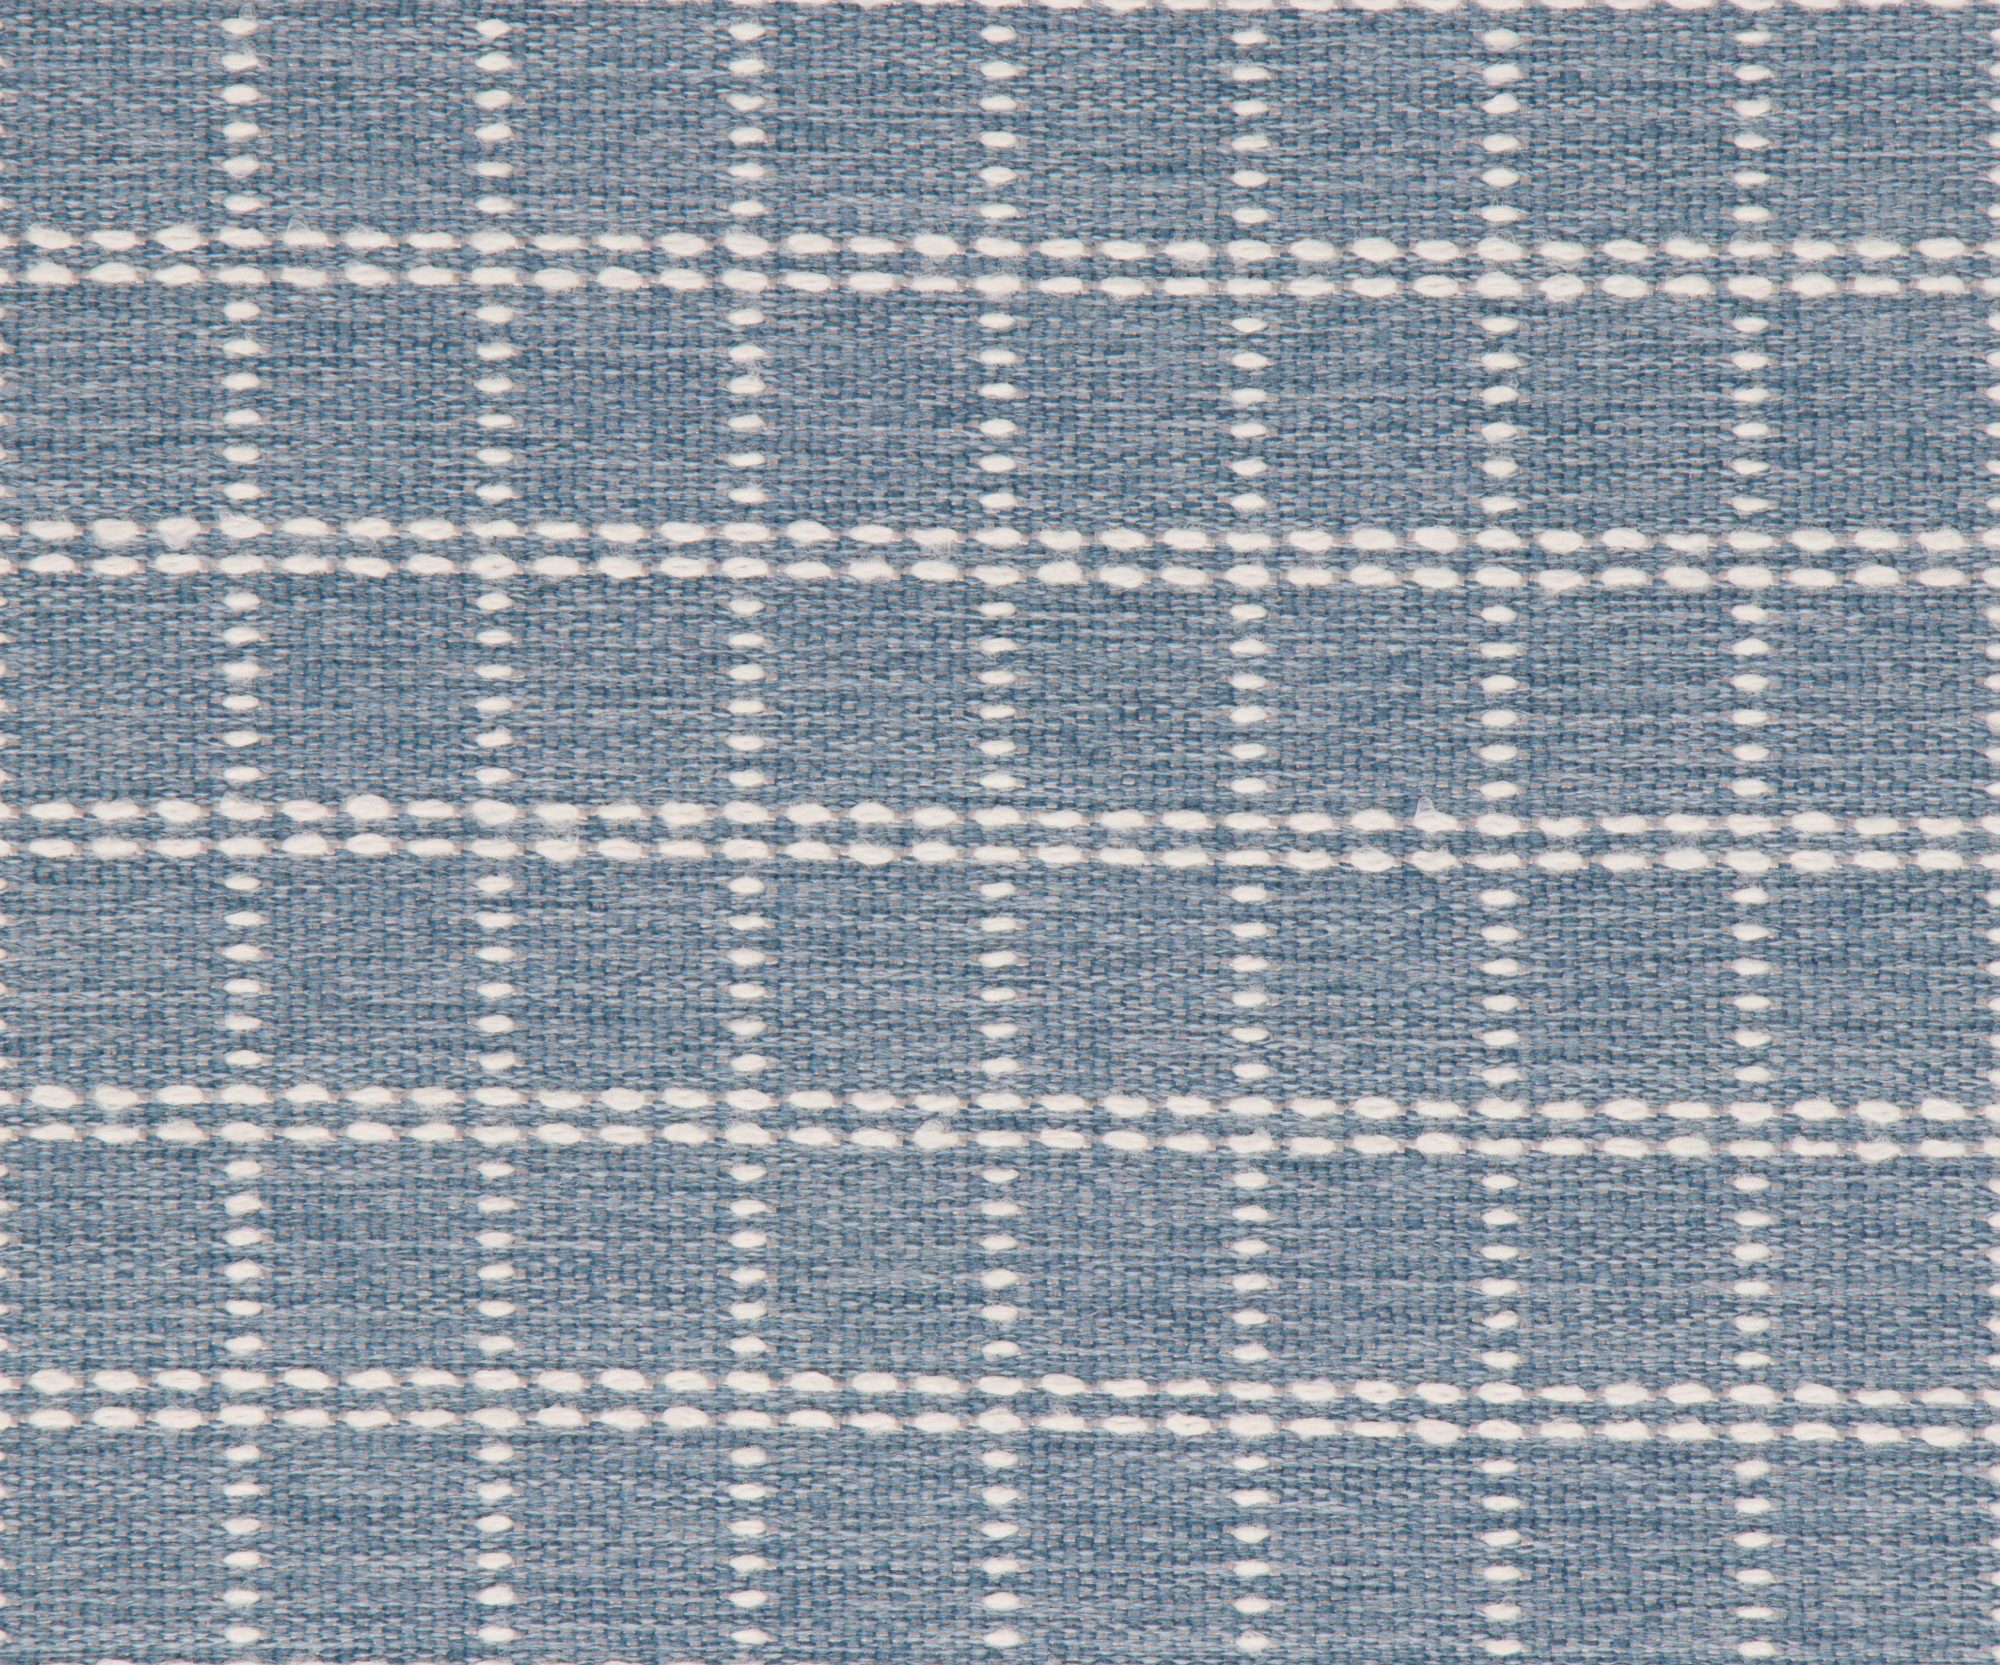 Cut yardage from Bella Dura and Bella Dura Home in the pattern Motthaven and color Cerulean.